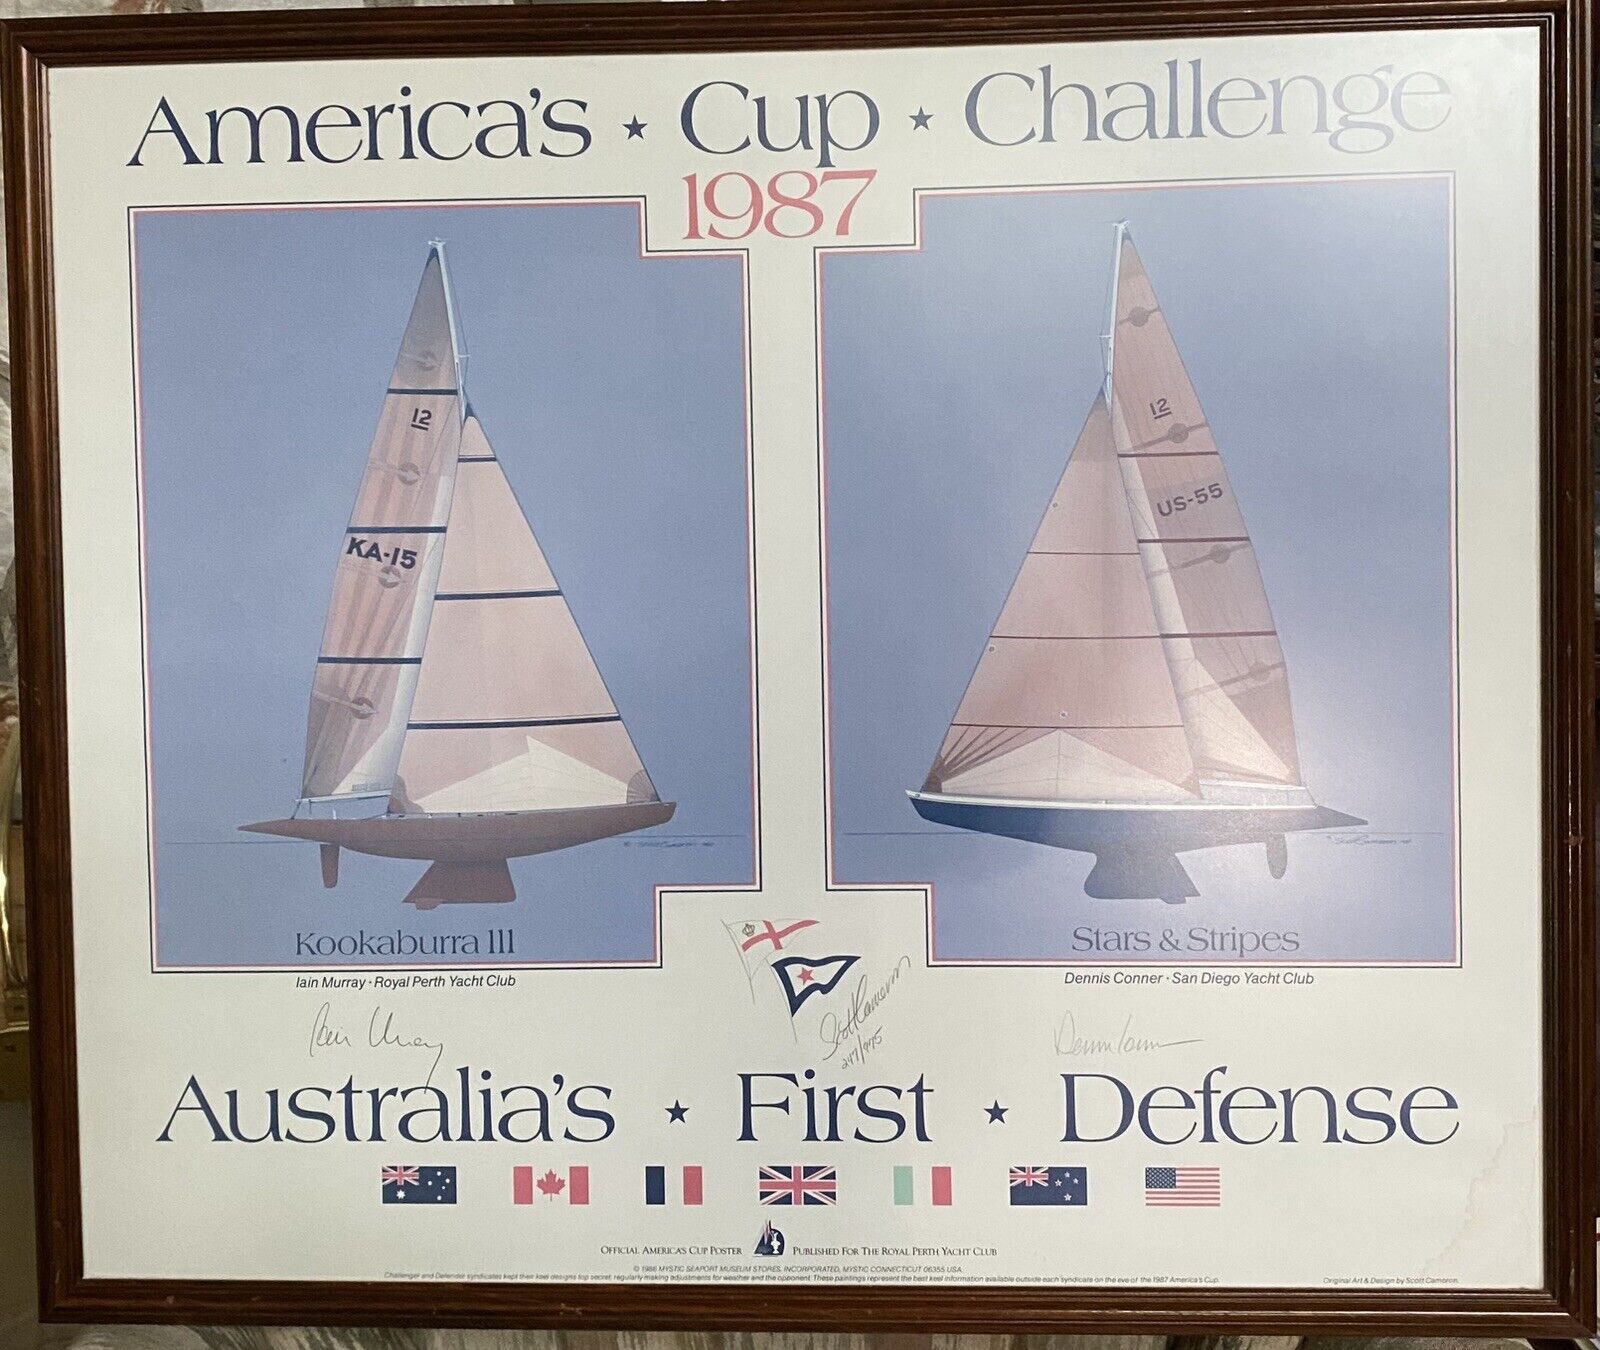 America’s Cup Challenge 1987 - Australia’s First Defense Signed Cameron Print